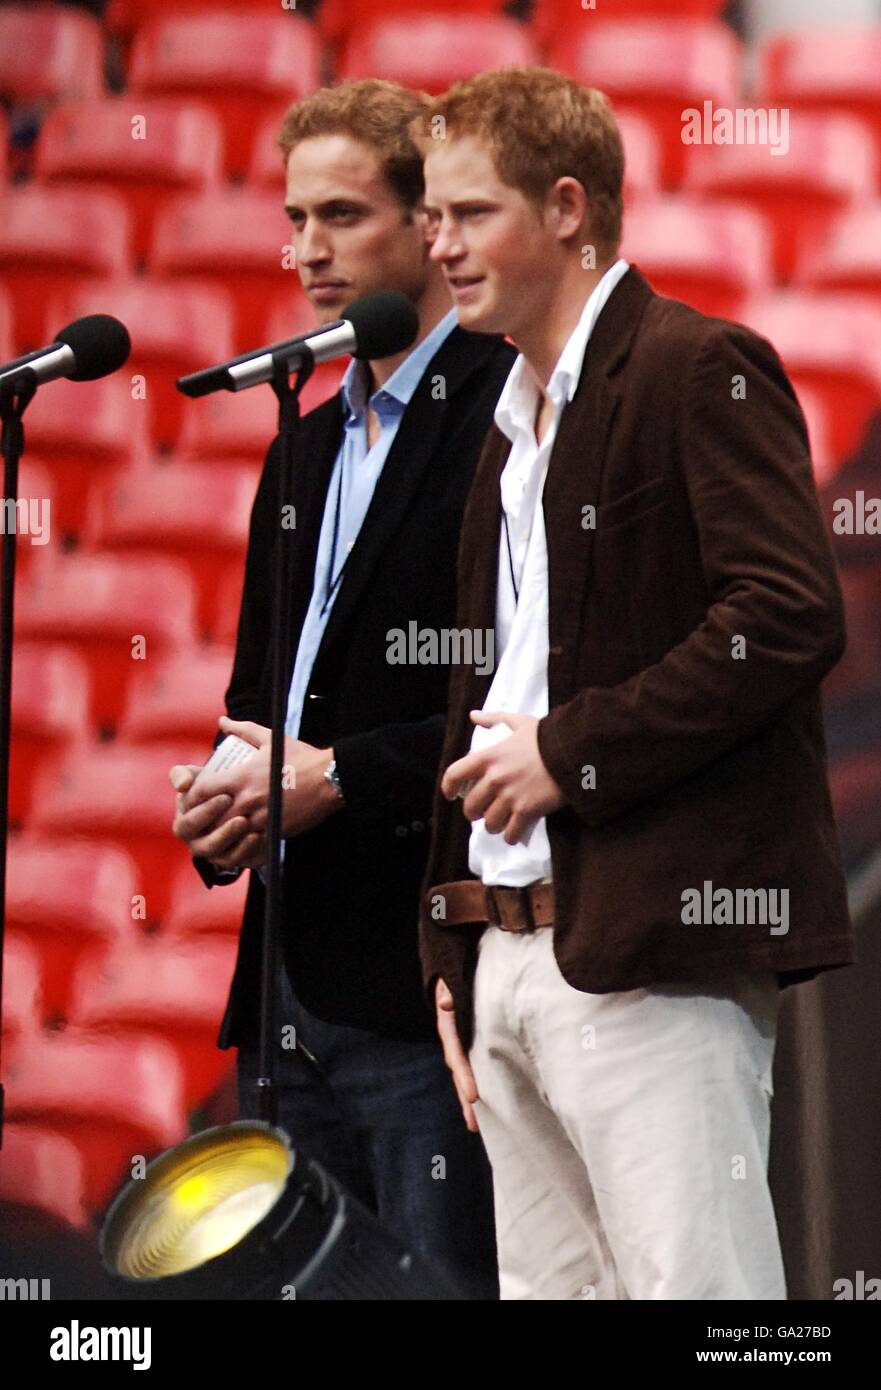 Princes William and Harry address the crowd during the charity concert in memory of their mother Diana, Princess of Wales on what would have been her 46th birthday at Wembley Stadium, London. Stock Photo